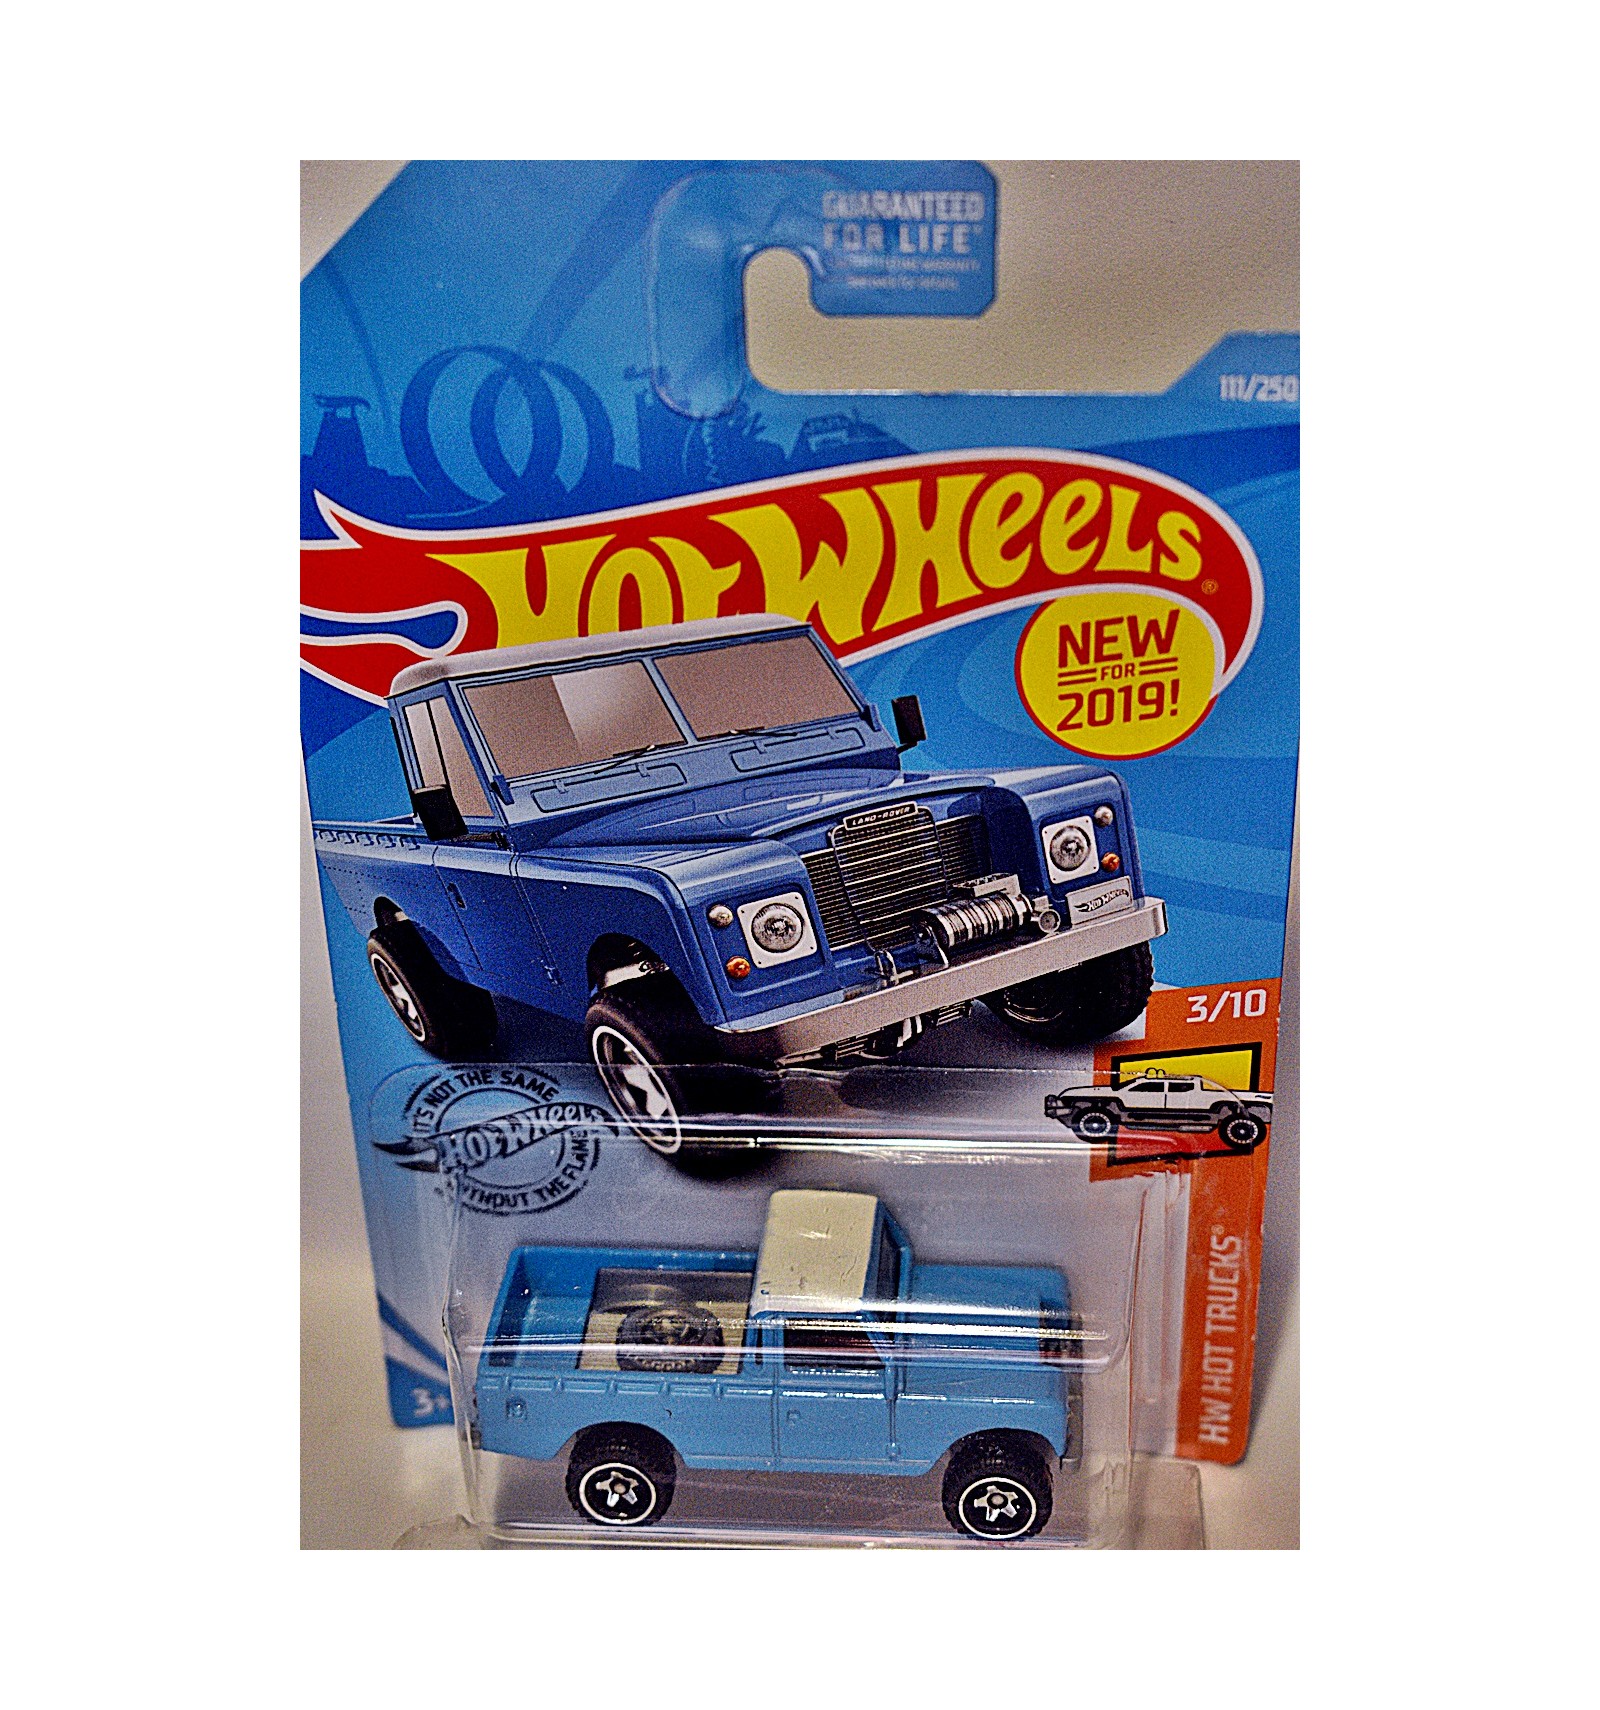 HW HOT TRUCKS 3/10 HW 111/250 Details about   2019 HOT WHEELS RED LAND ROVER SERIES III PICKUP 